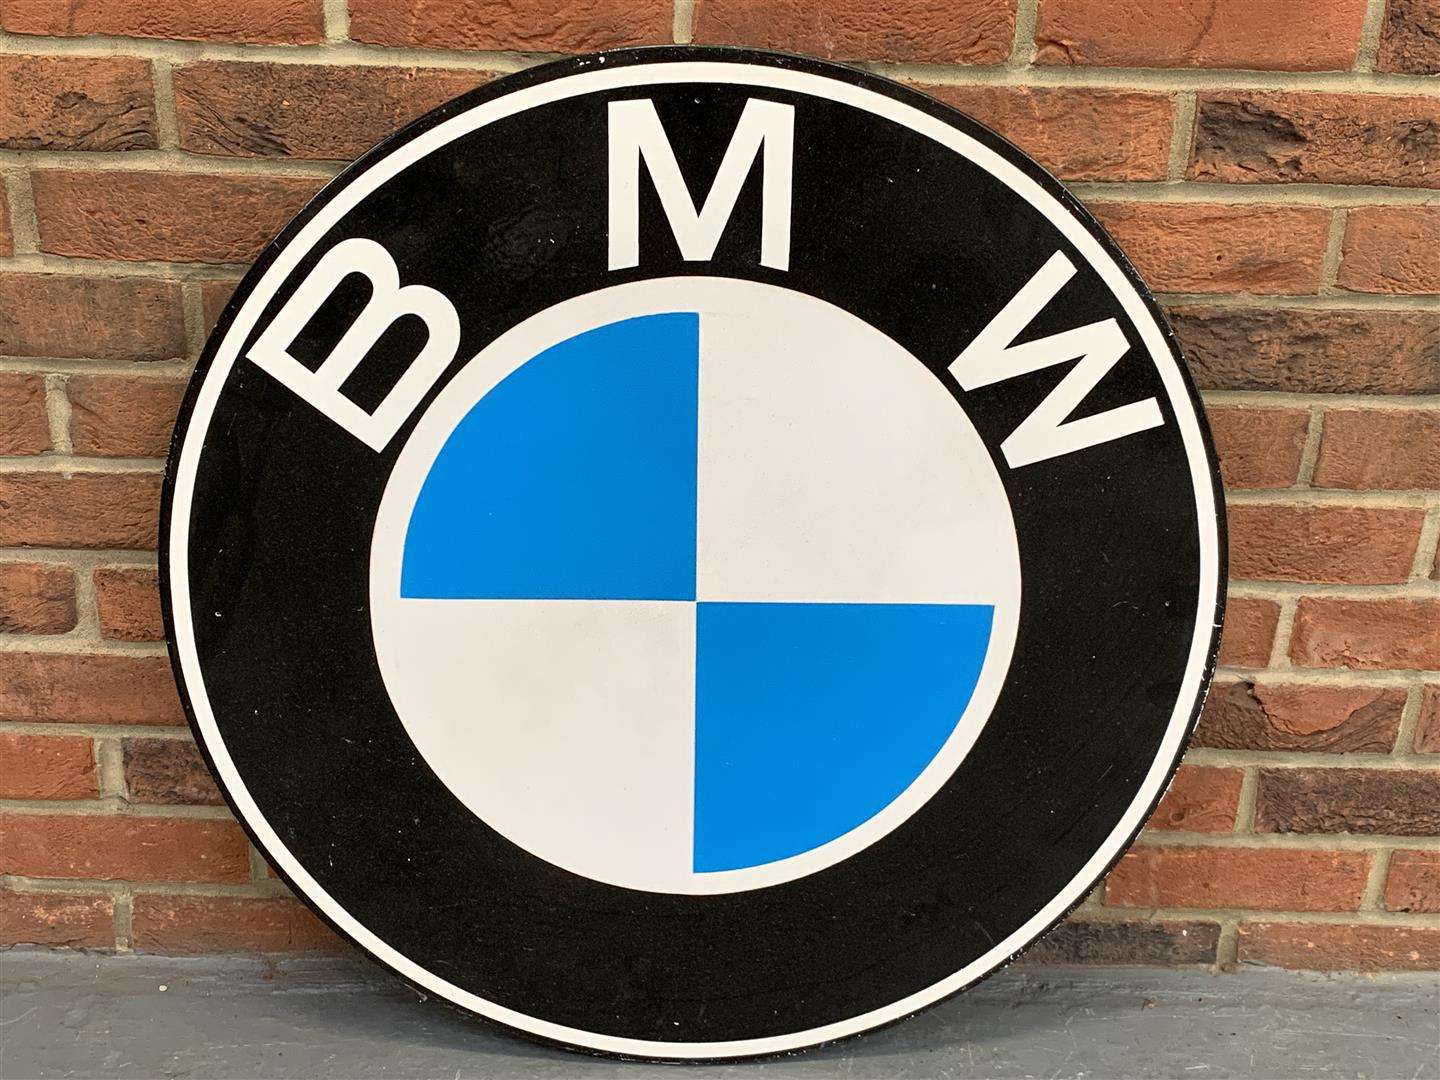 <p>Pair of BMW emblems painted on board</p>